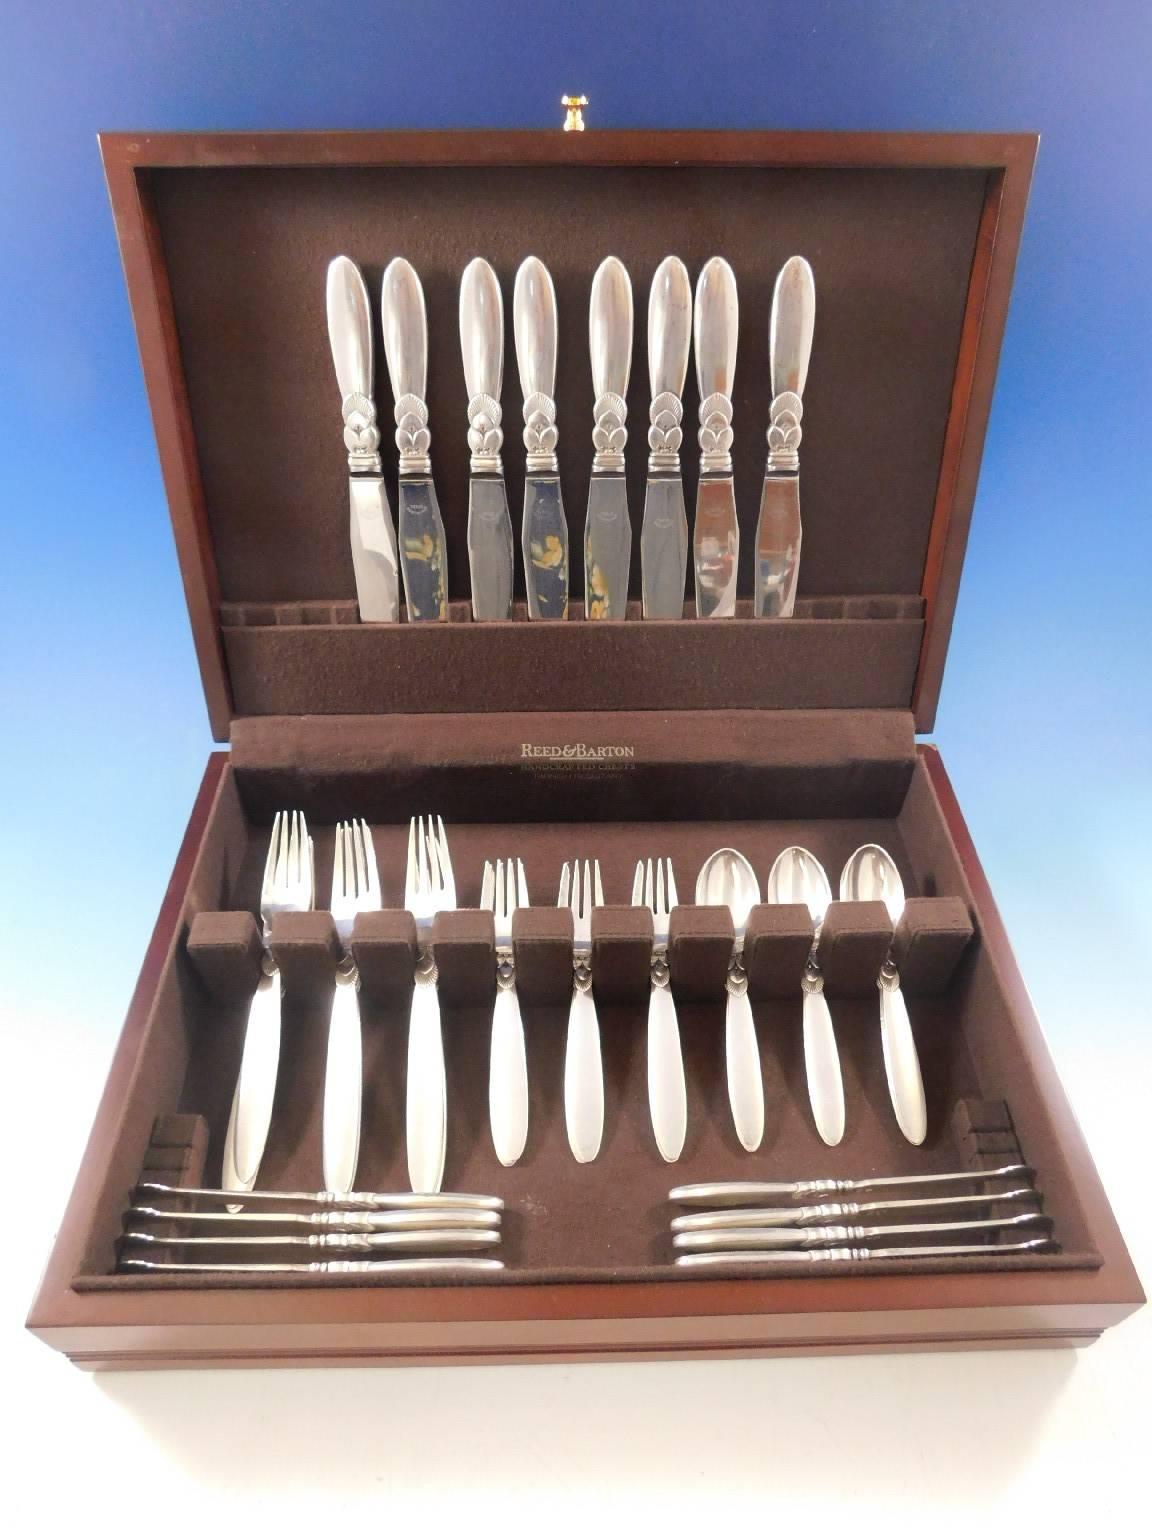 Outstanding early dinner size Cactus by Georg Jensen sterling silver flatware set, 40 pieces. This set includes:

Eight dinner knives, 9